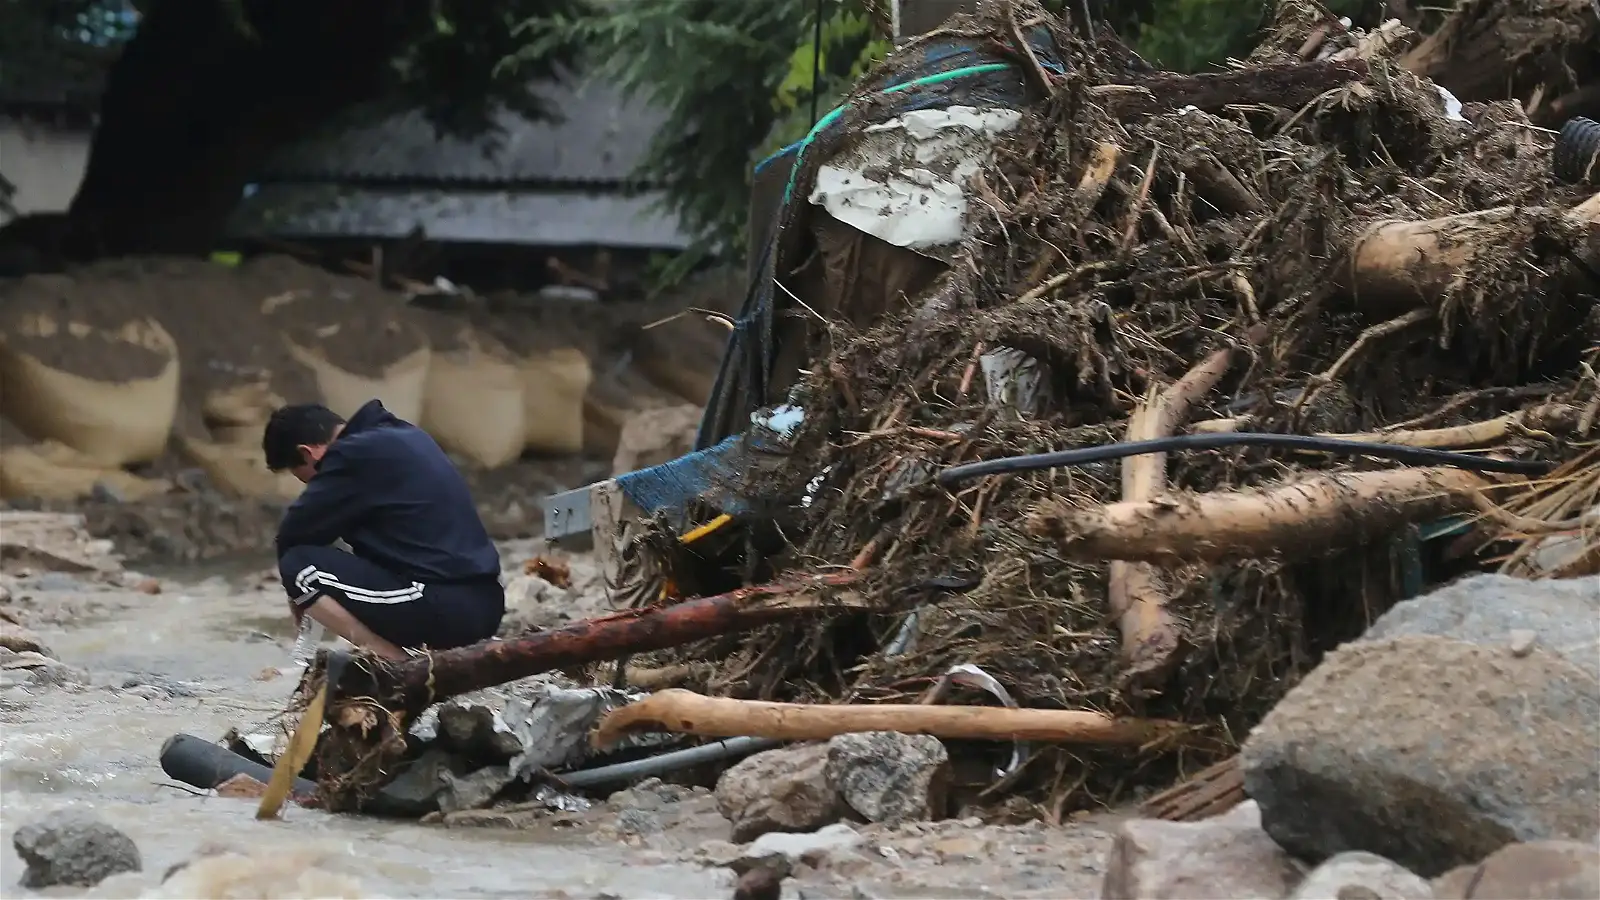 South Korea accused of paying lip service to climate action after deadly floods